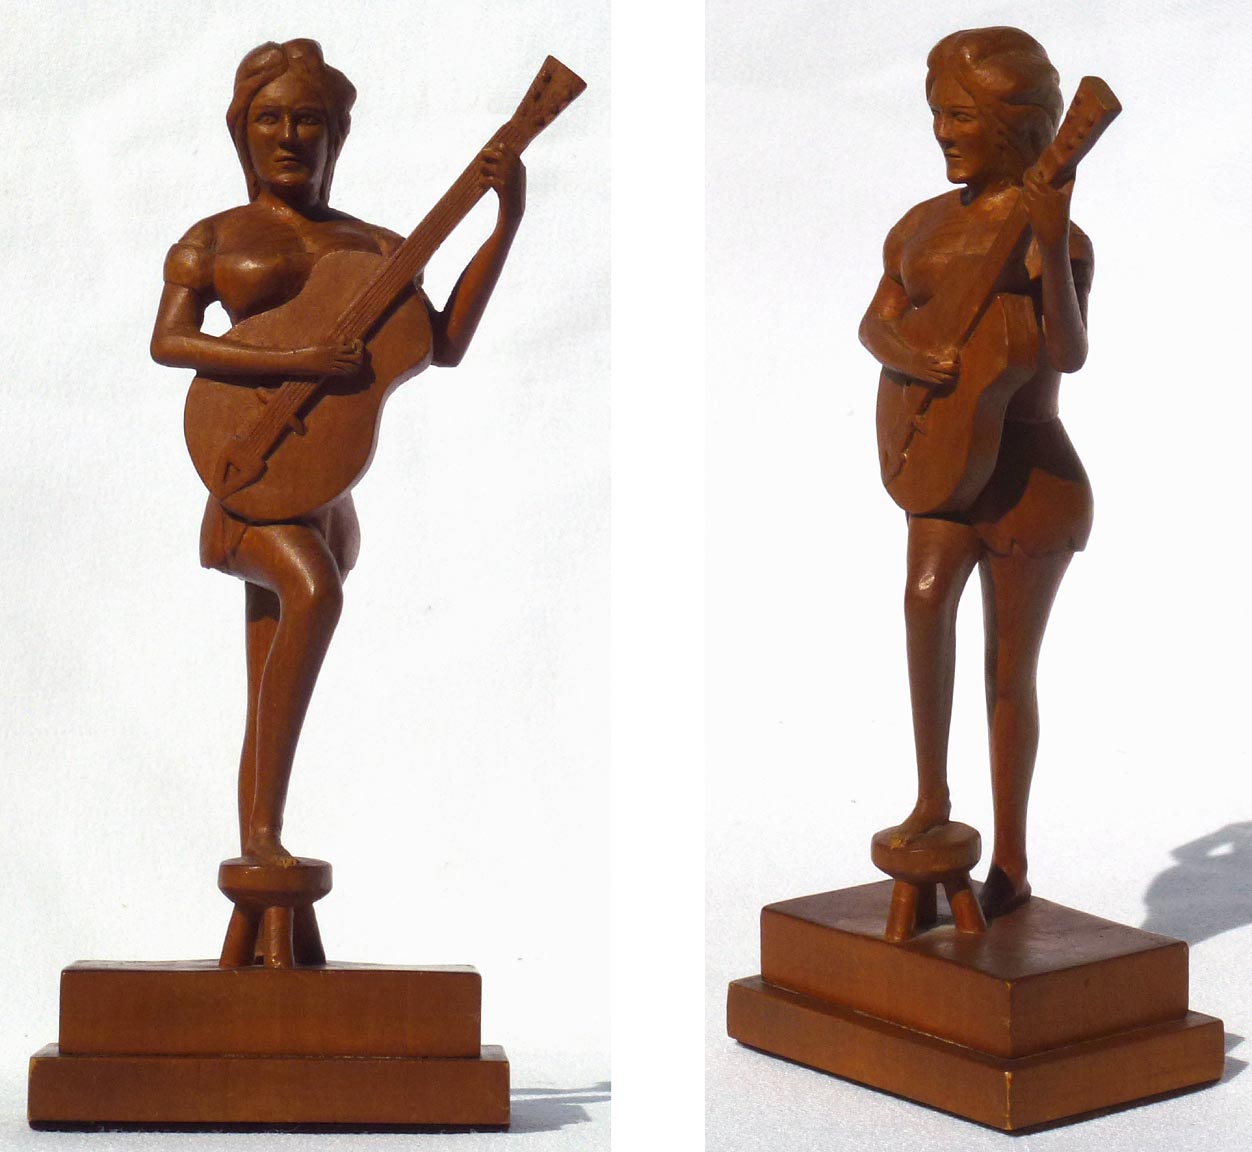 Carving of a woman playing guitar